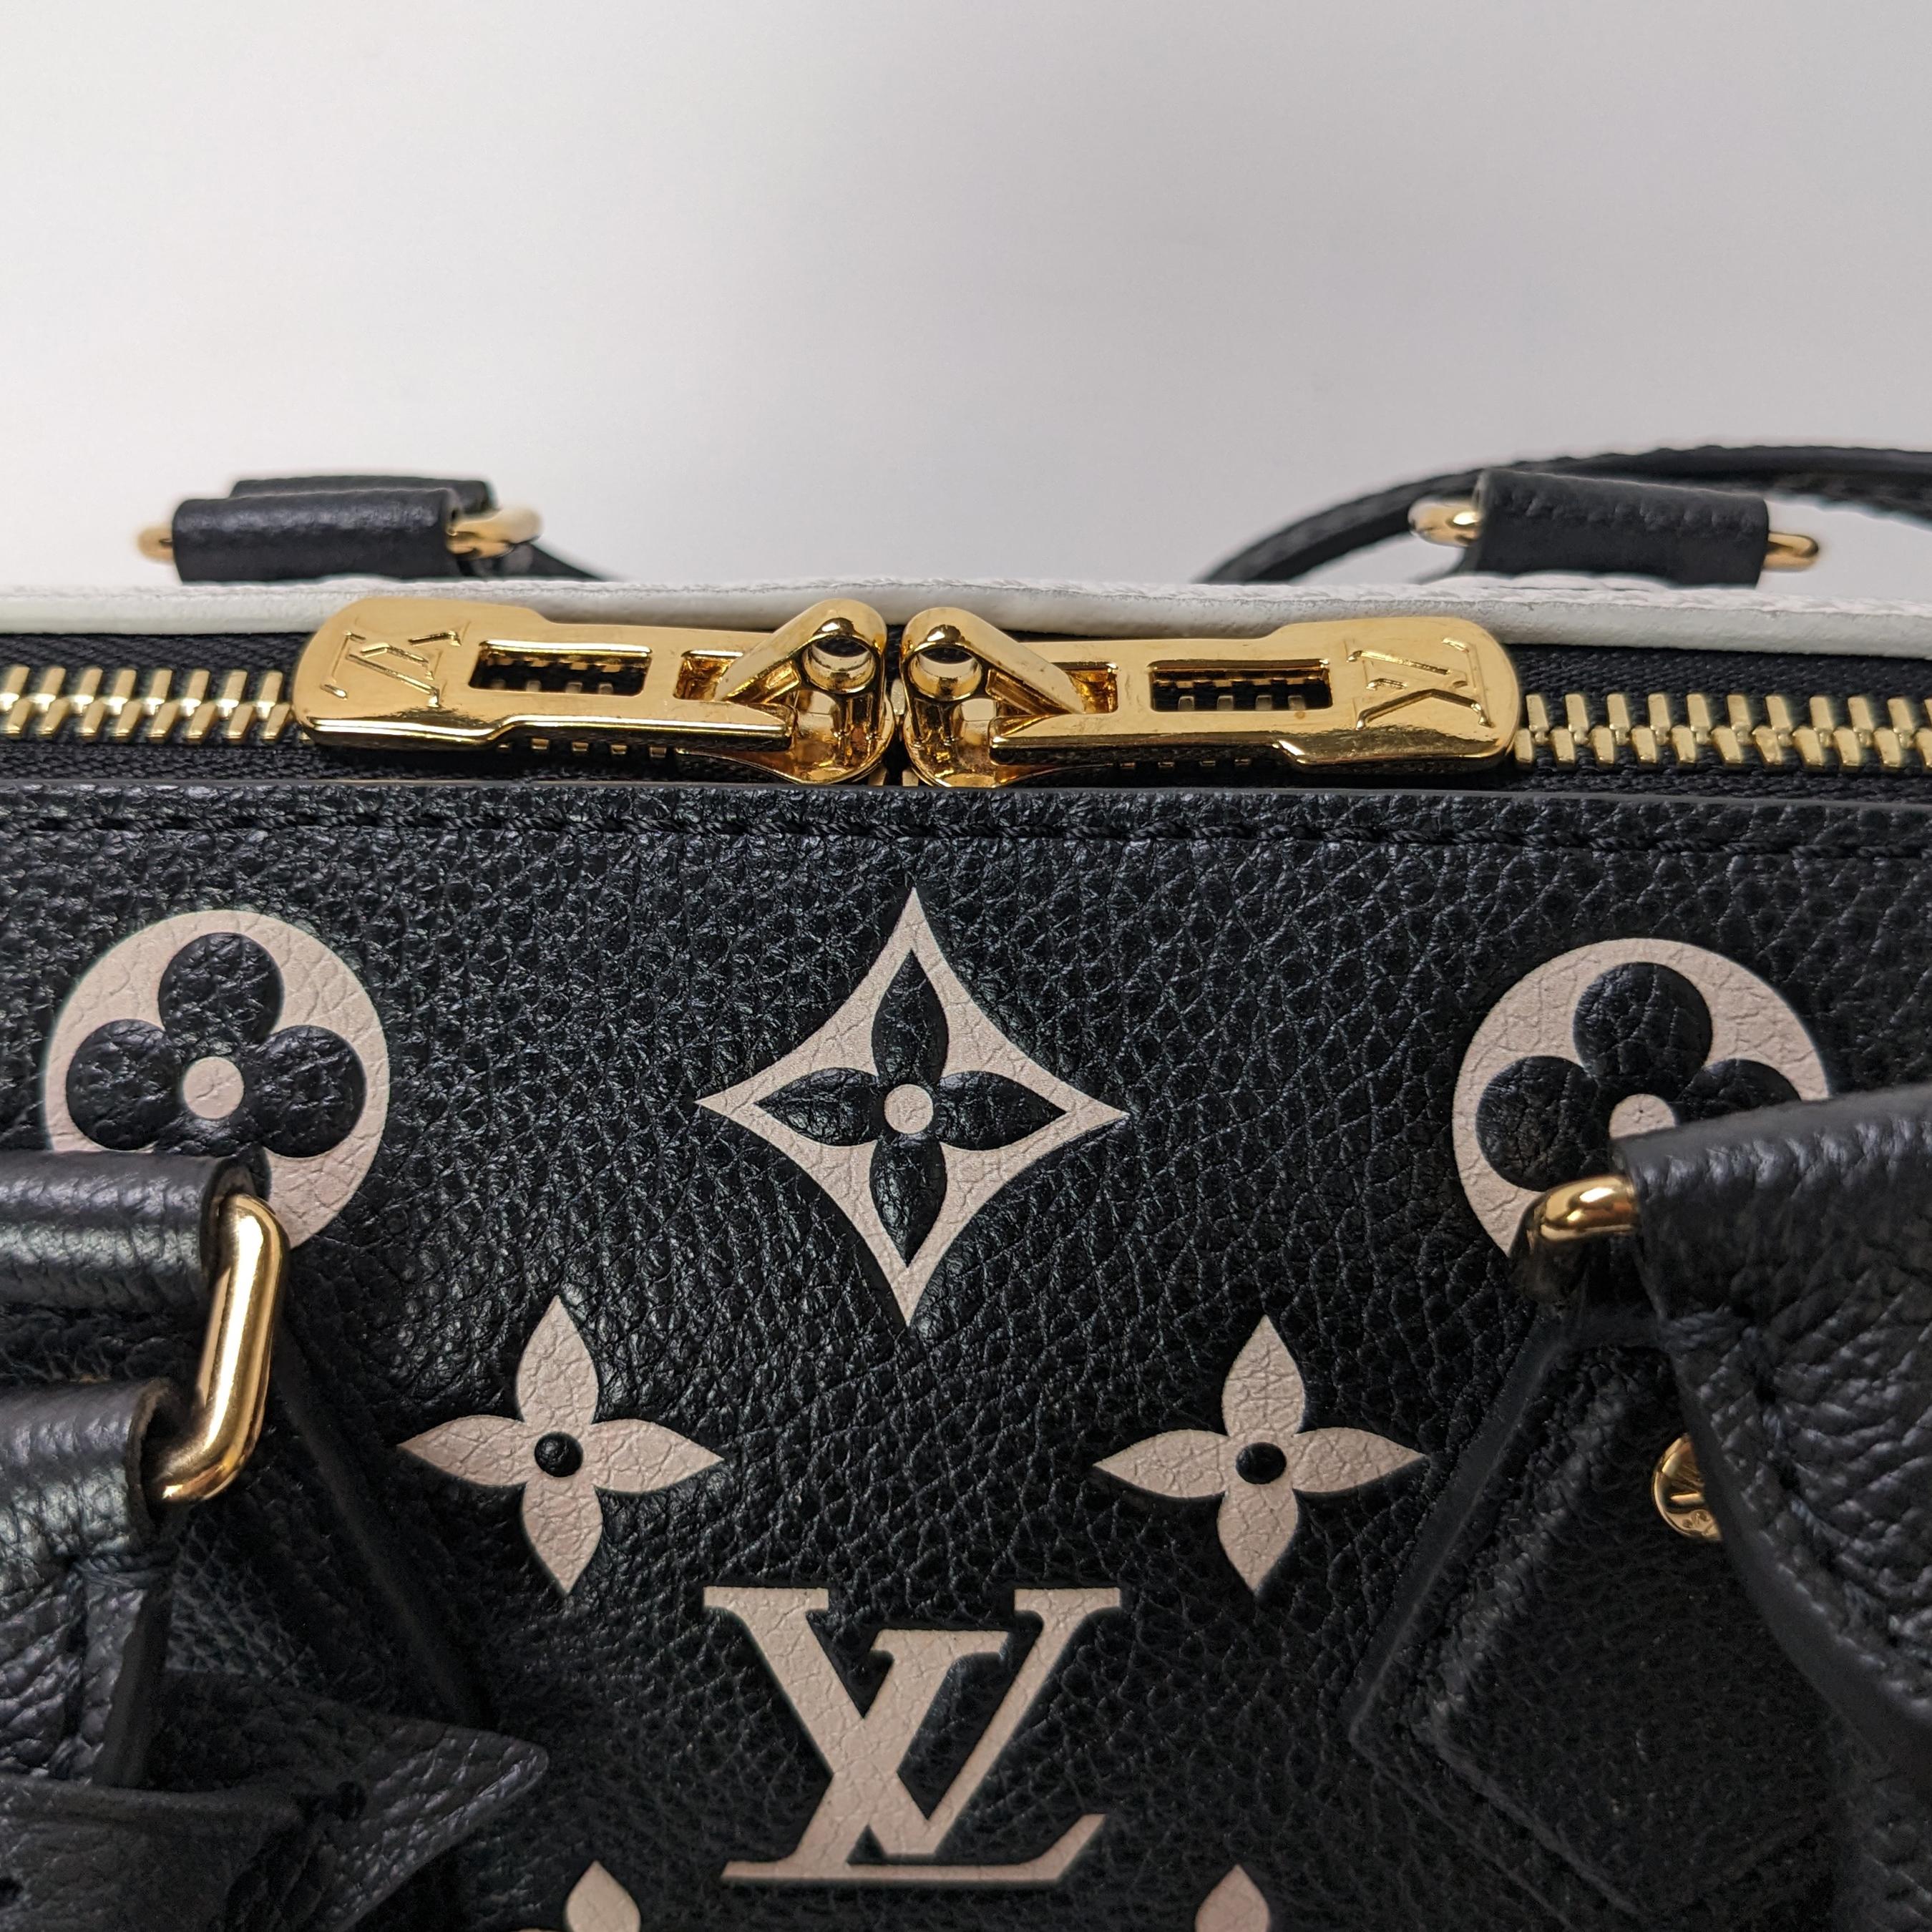 Condition: This authentic Louis Vuitton bag is in excellent pre-loved condition. There are scratches on the hardware and a tiny slit in the leather on the side of the bag.

Includes: Dust bag, box, ribbon, tag, keys, lock, charm

Features: It